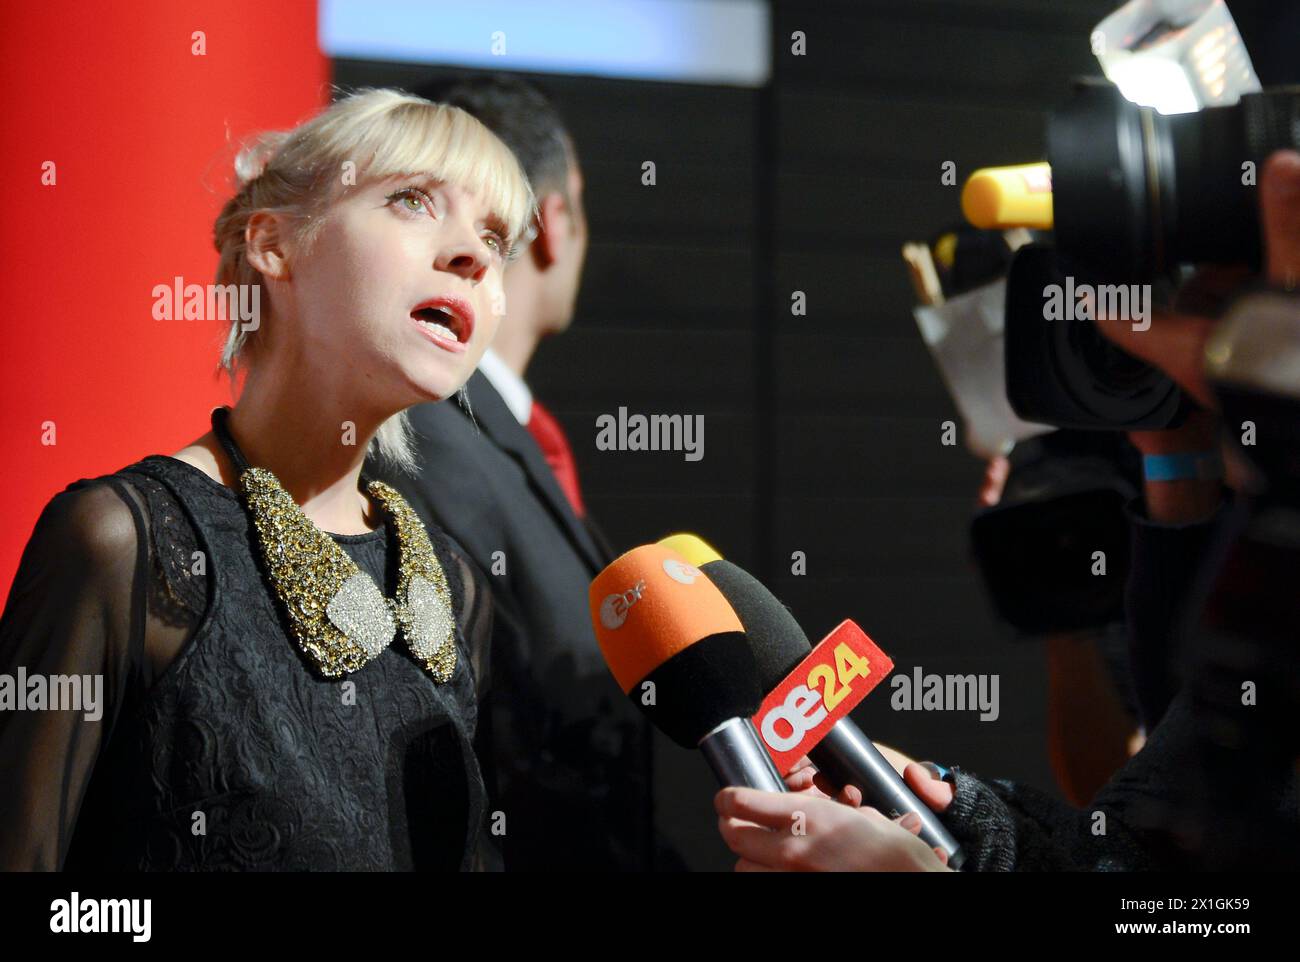 Vienna - Premiere of the movie '3096 days' at the Cineplexx cinema Wienerberg in Vienna, Austria, 25 February 2013. The movie tells the story of Austrian Natascha Kampusch, who was kidnapped at the age of 10 and held in a cellar for over eight years. PICTURE:  Actress Antonia Campbell-Hughes on Red Carpet - 20130225 PD3602 - Rechteinfo: Rights Managed (RM) Stock Photo